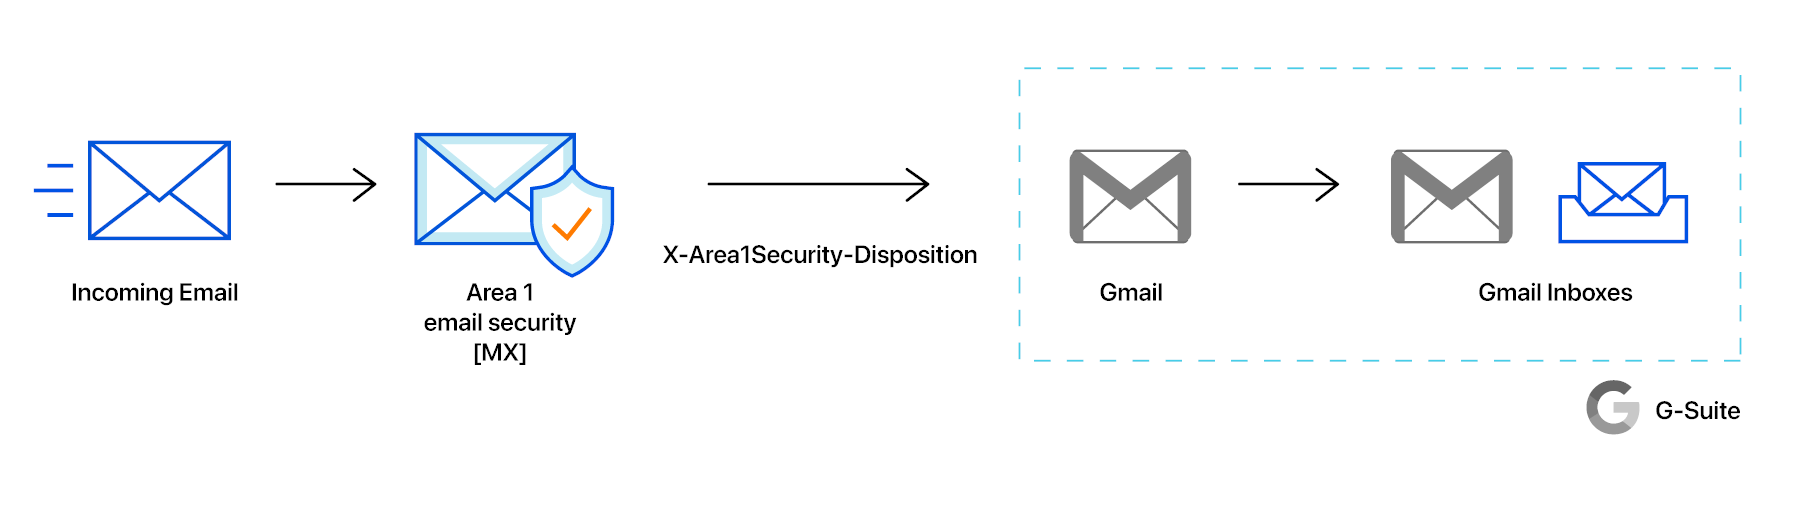 A schematic showing where Area 1 security is in the life cycle of an email received